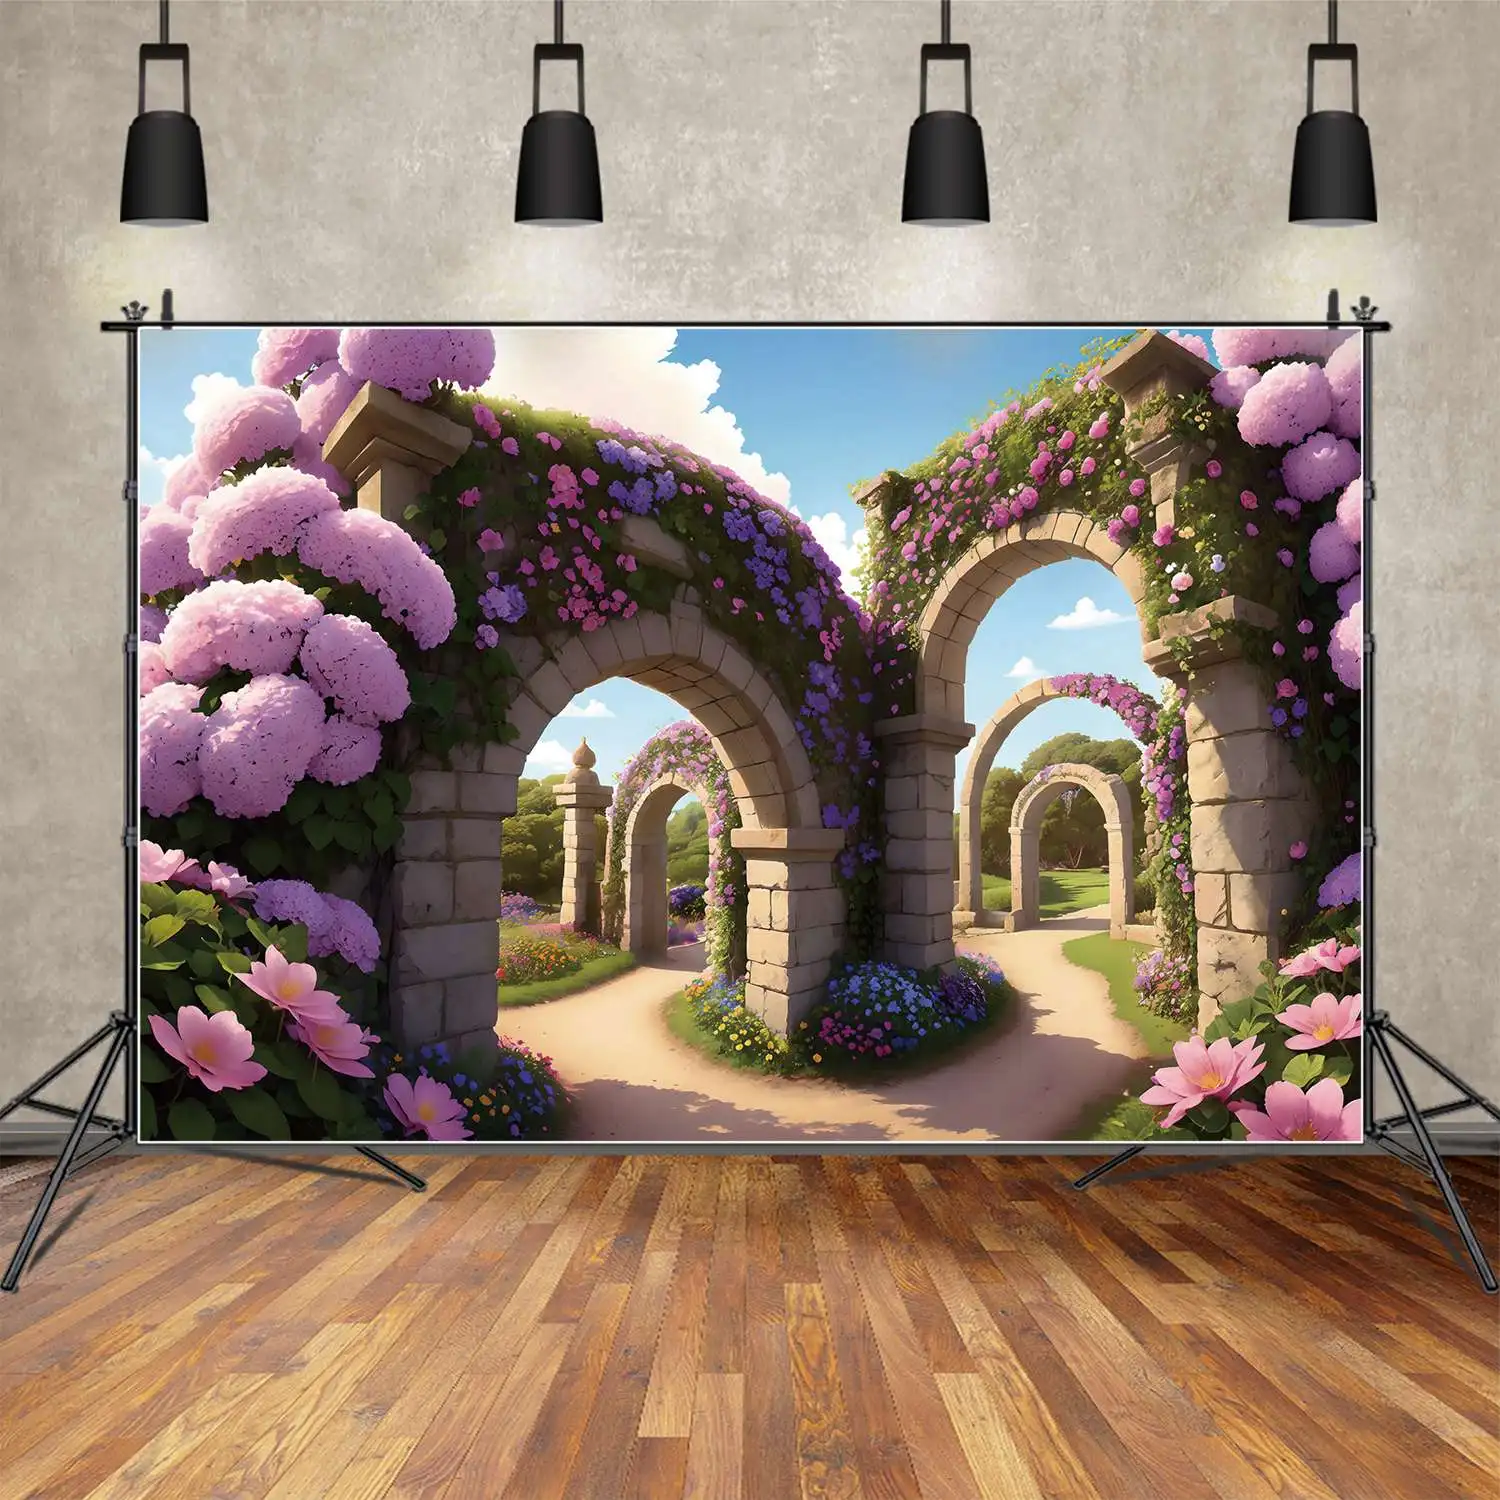 

Pink Floral Flowers Spring Backdrop Photo Booth Children's Outing Holiday Arch Door Wall Garden Park Photoshoot Background Props